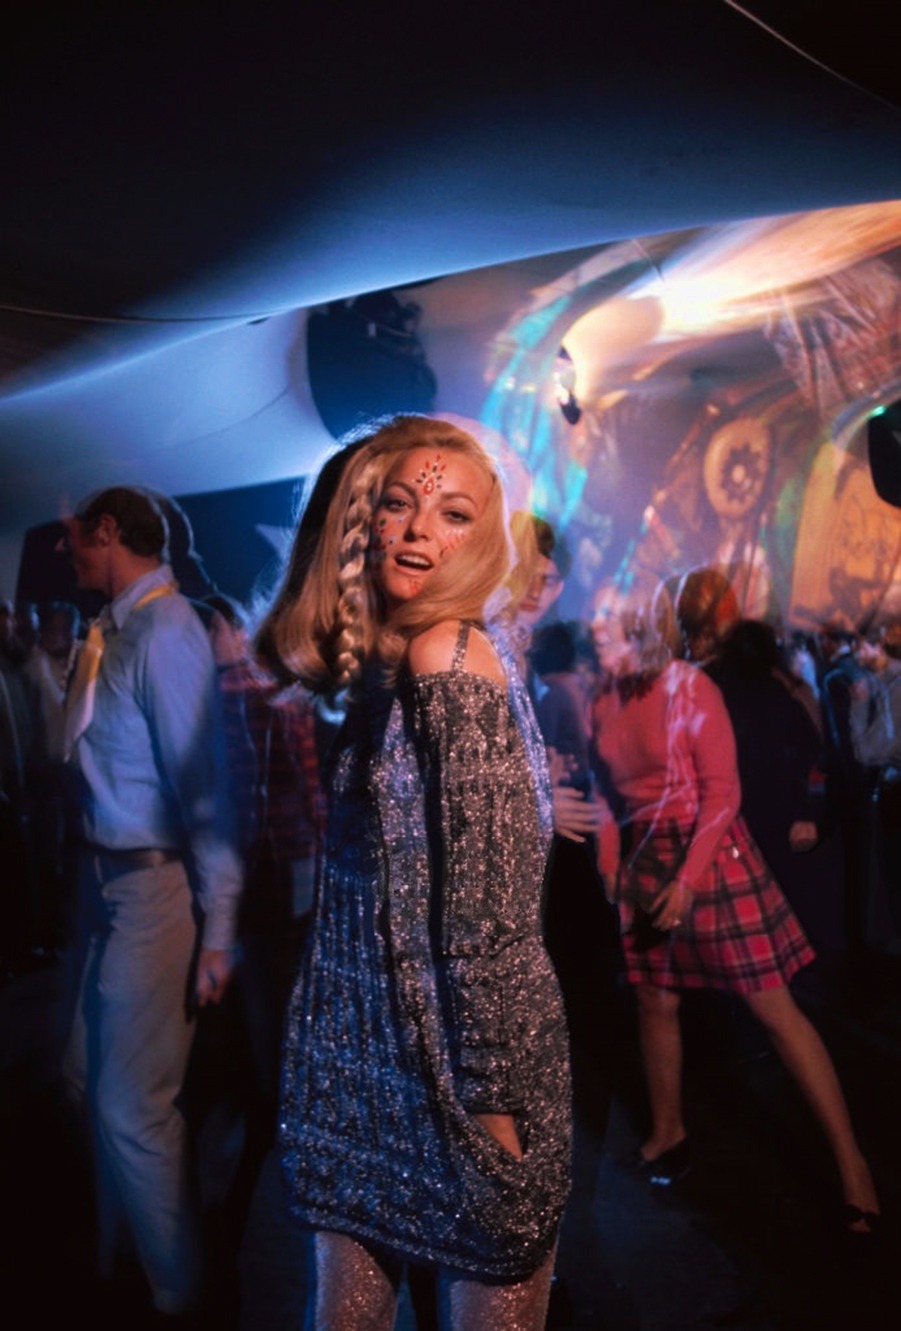 Dancing at a psychedelic party - 1967, Los Angeles.jpg